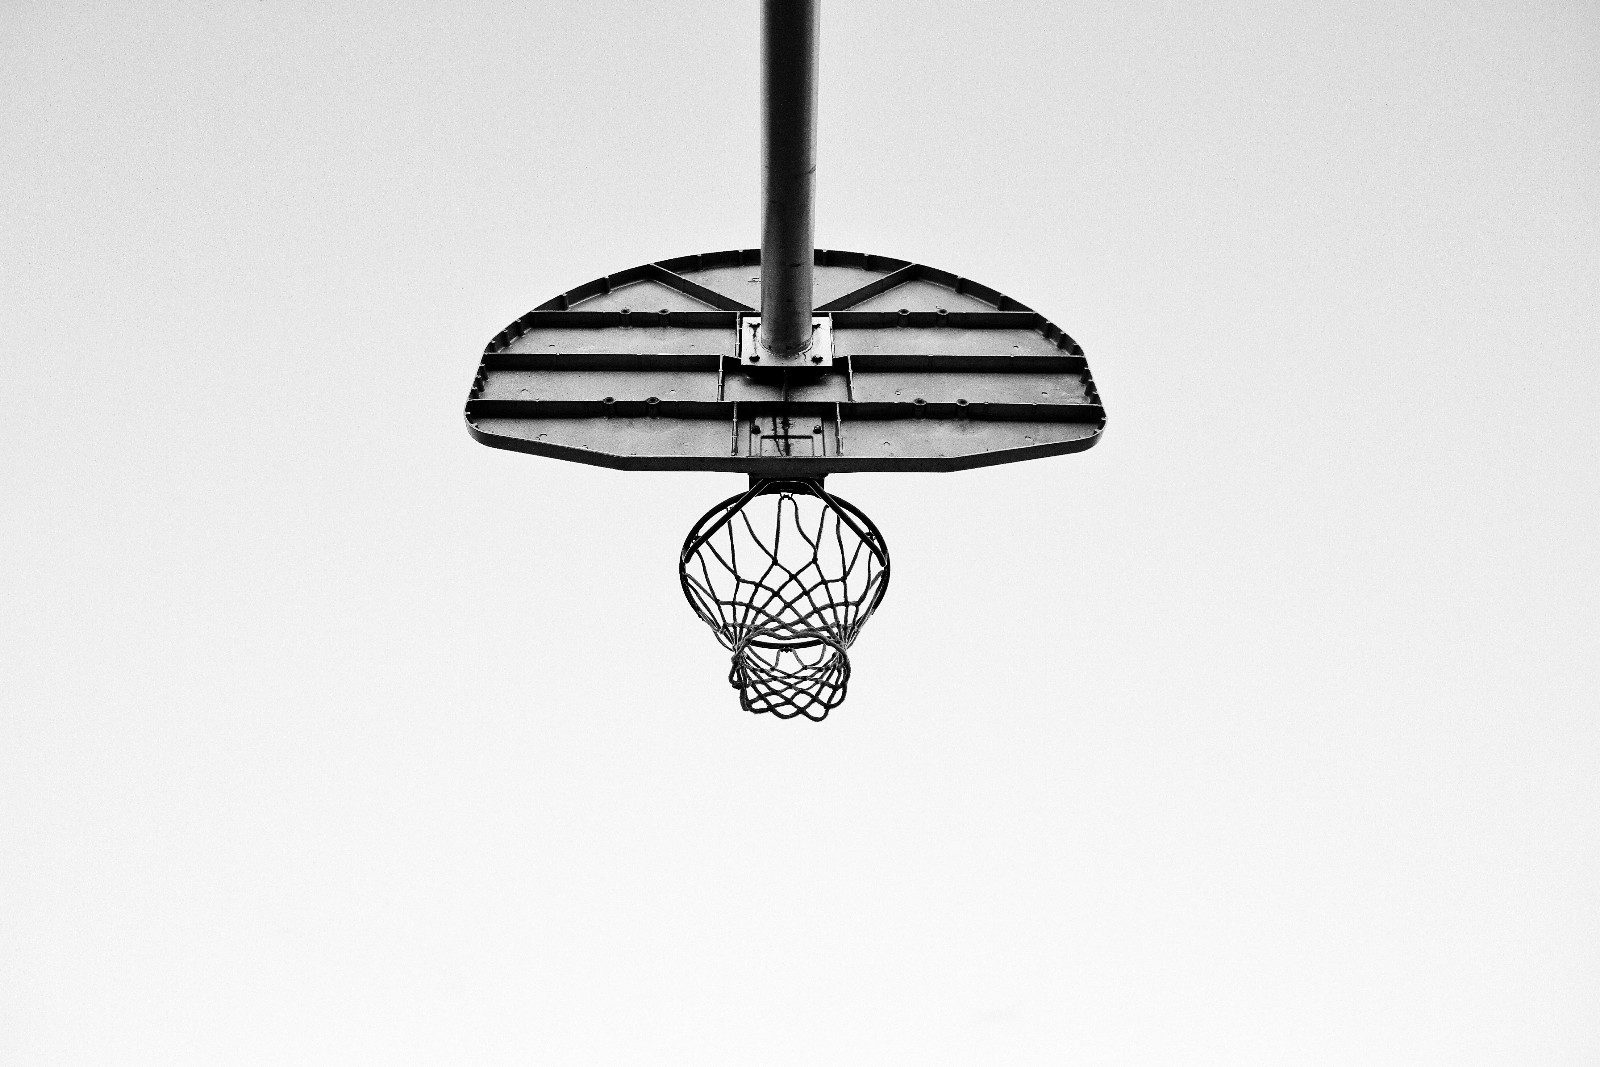 a basketball hoop seen from below and behind